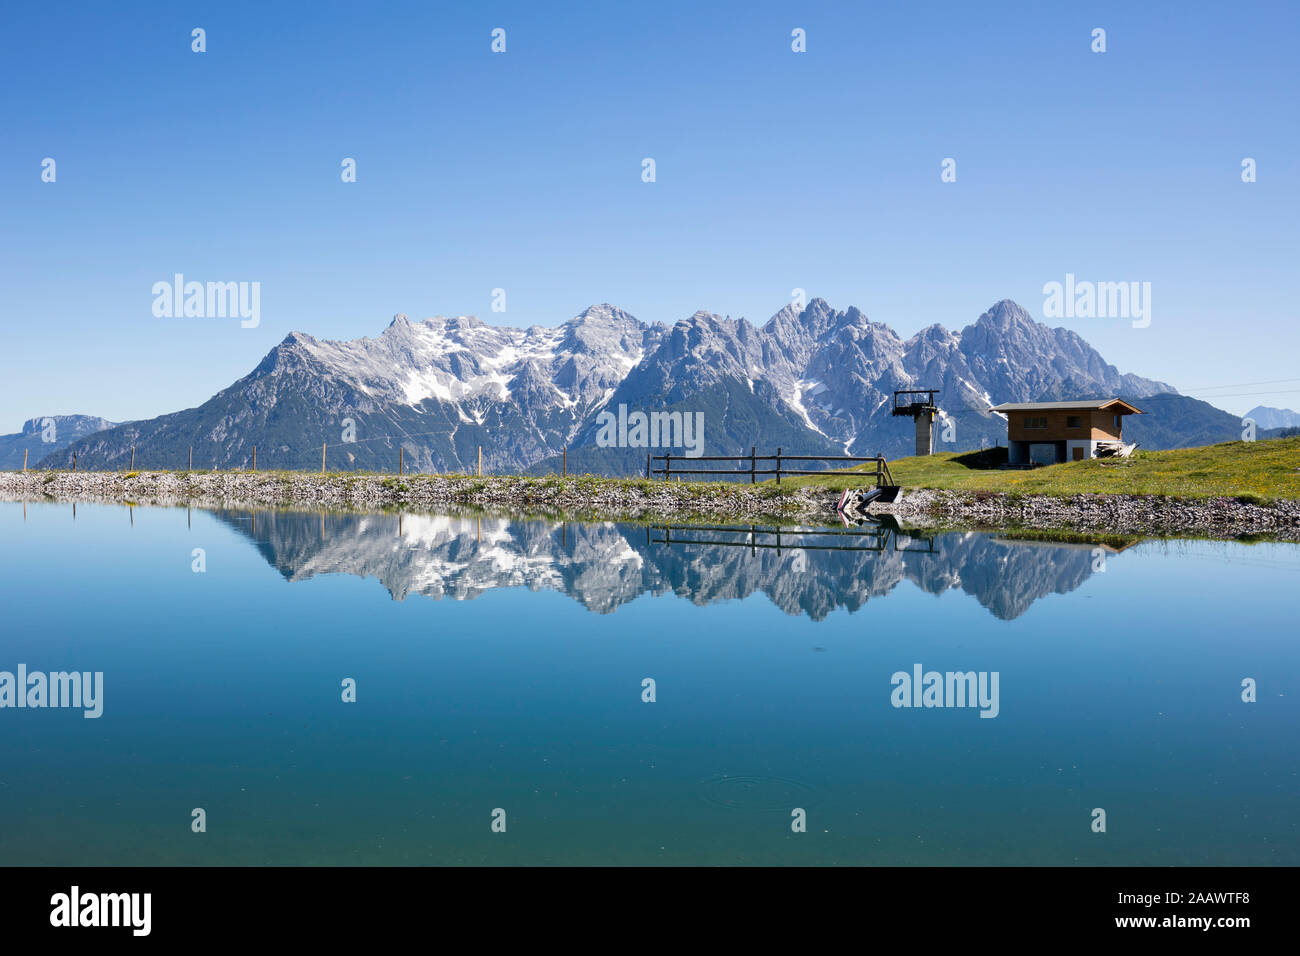 Scenic view of calm lake and Loferer Steinberge against clear blue sky, Kitzbühel, Tyrol, Austria Stock Photo